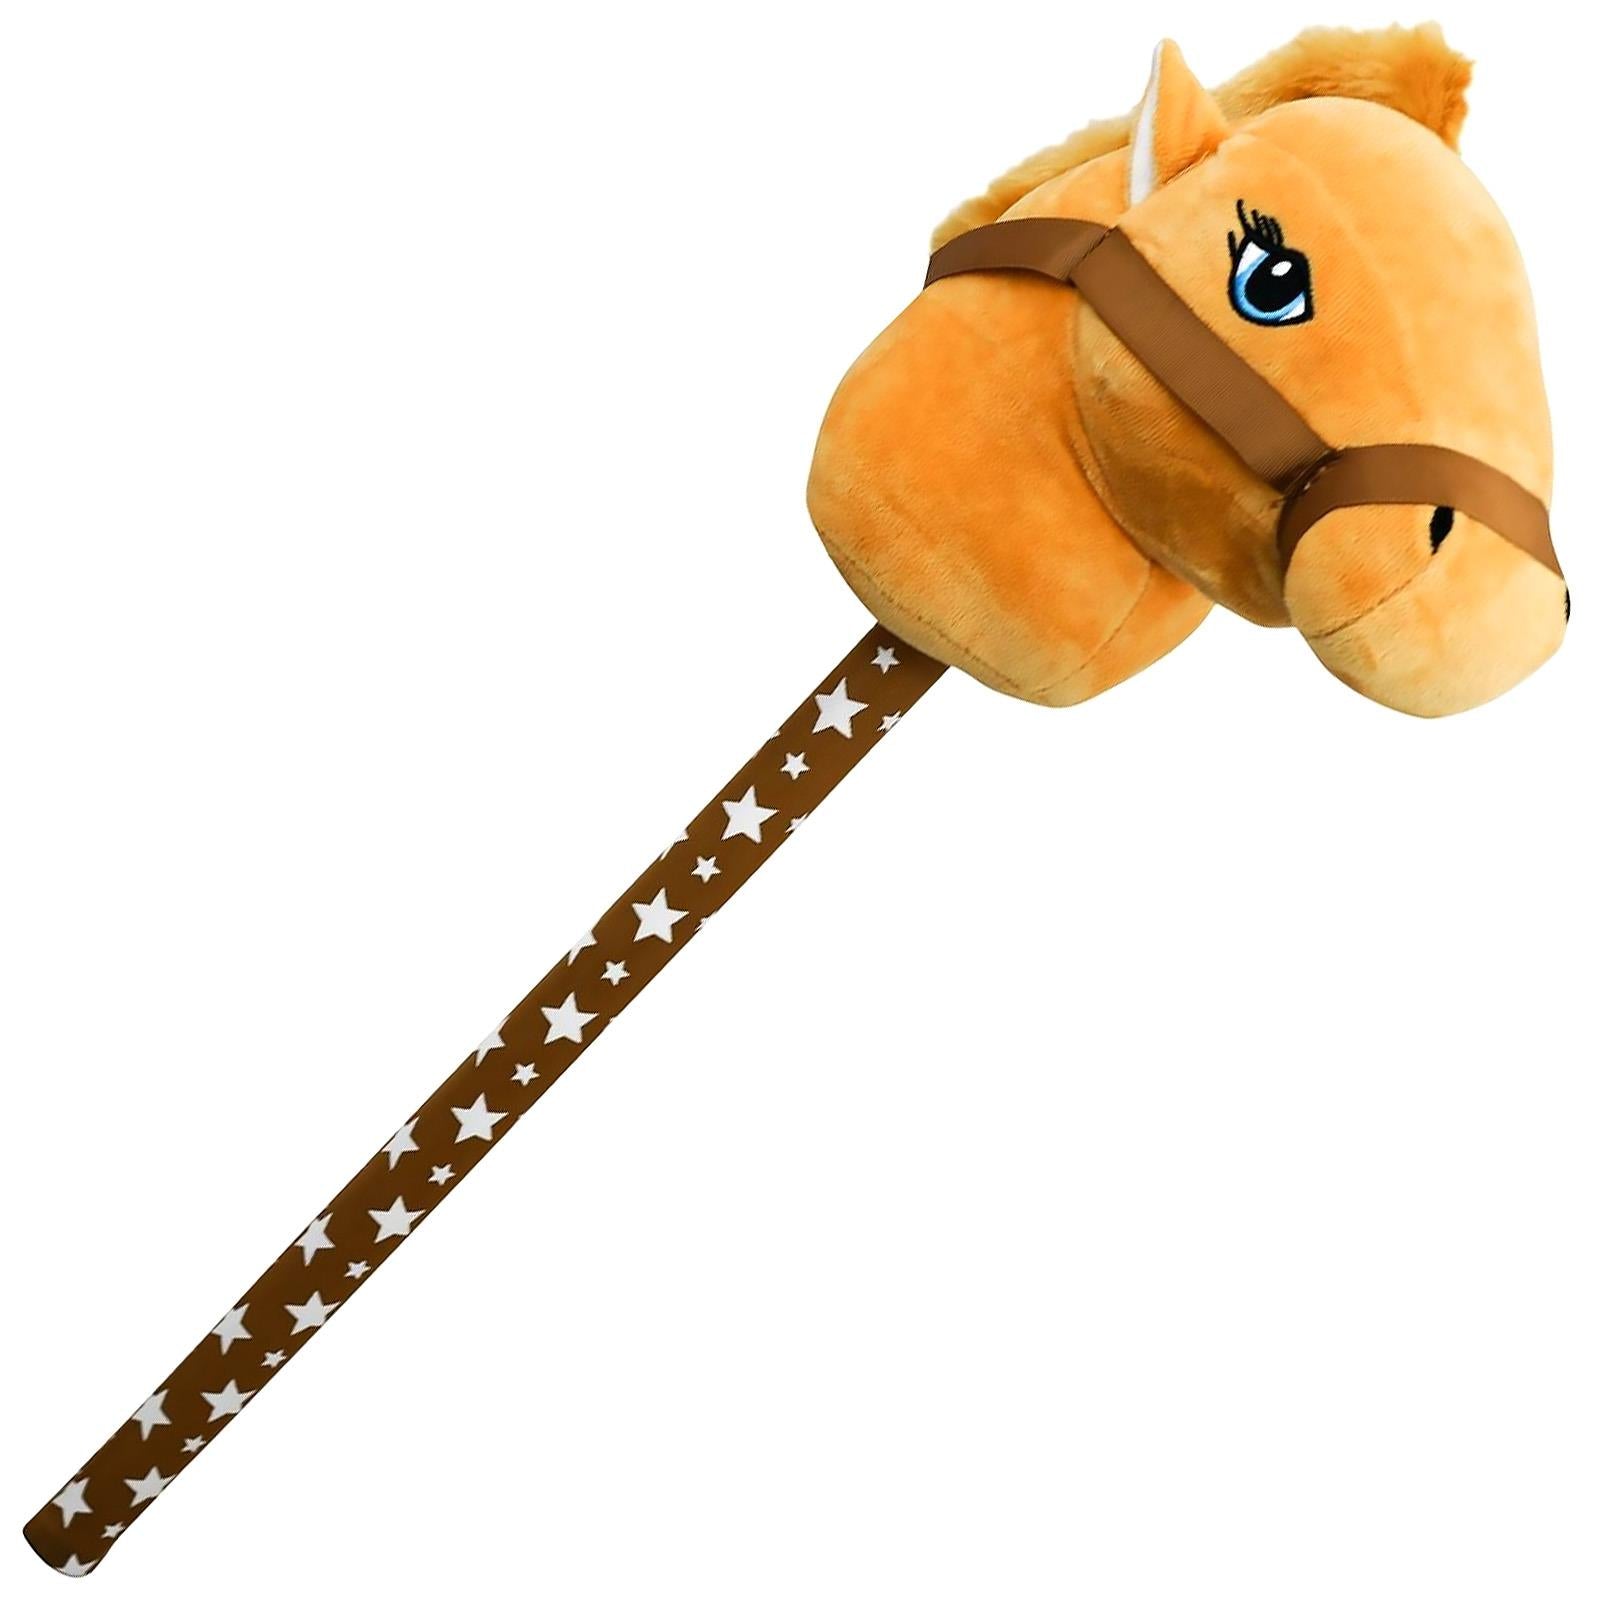 Kids Brown Hobby Horse With Sounds by The Magic Toy Shop - UKBuyZone